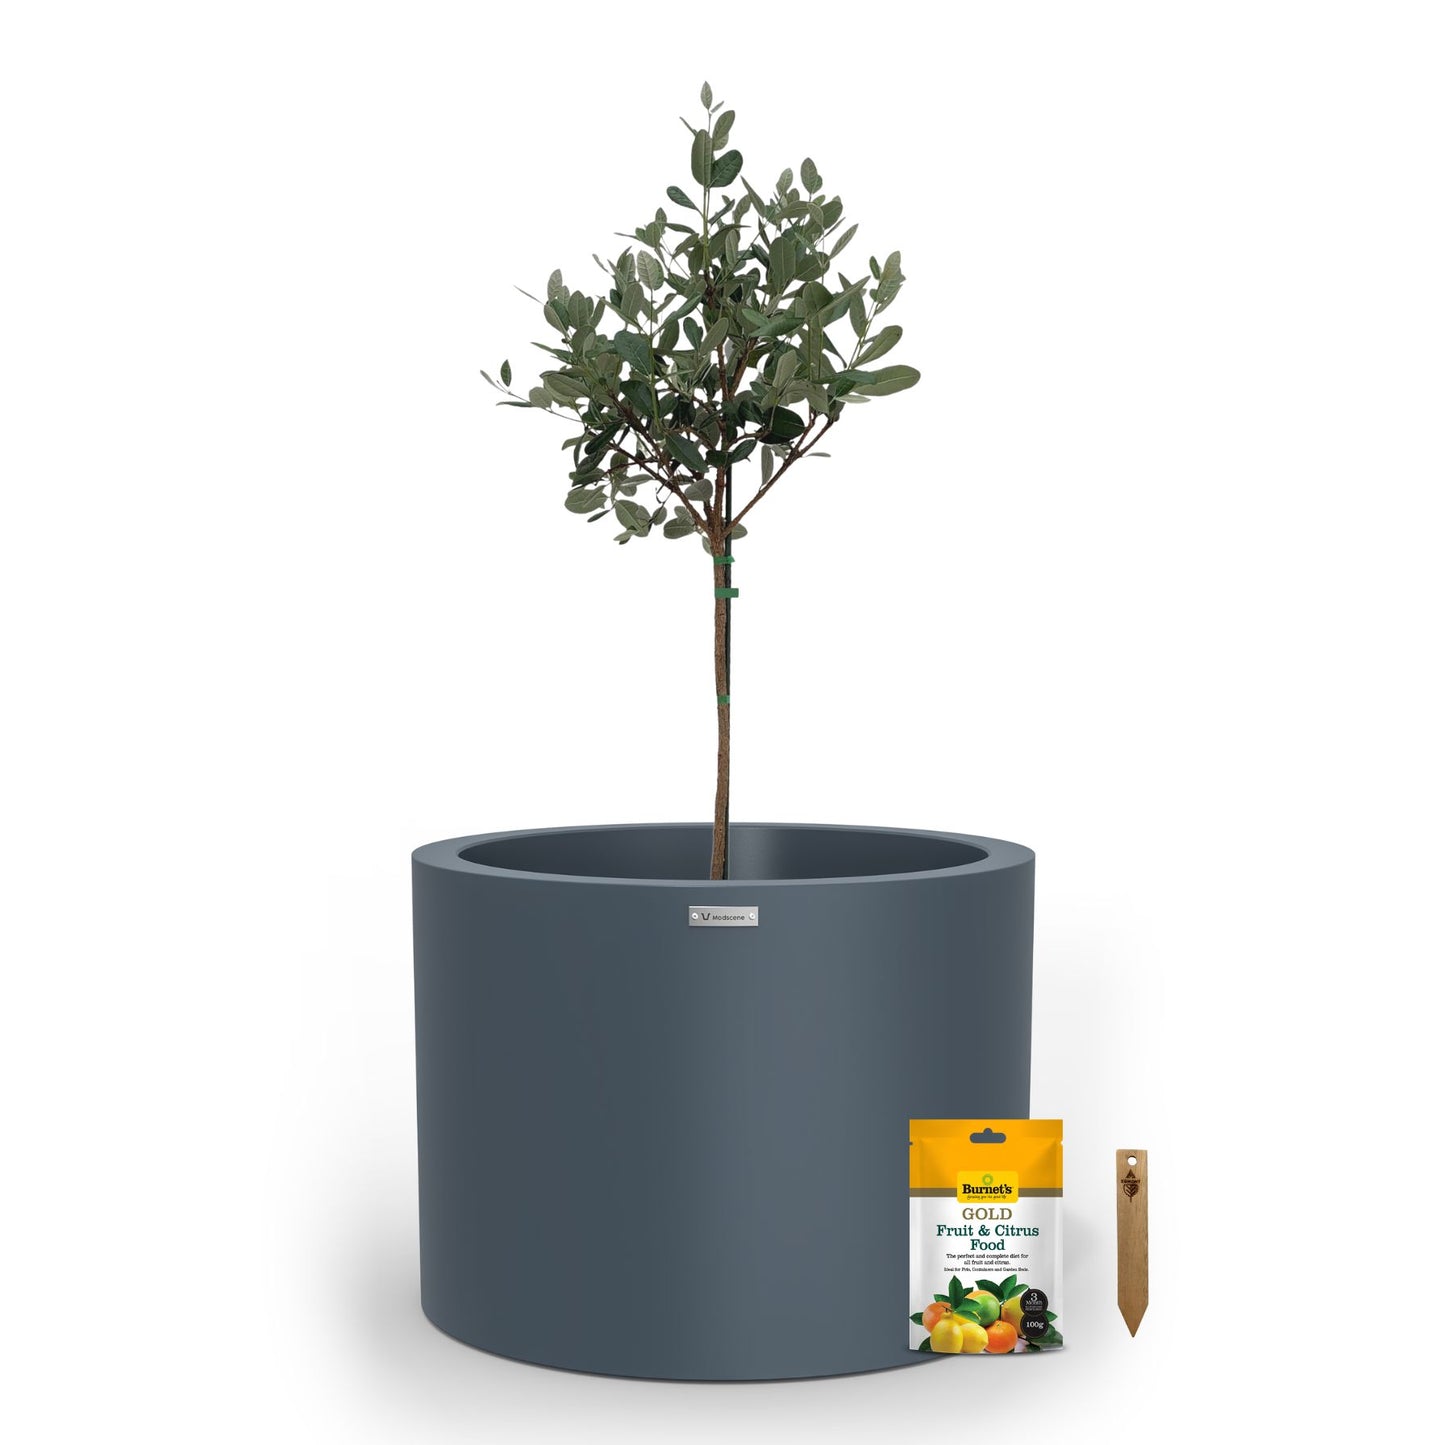 A large storm blue planter pot used to plant fruit trees. 